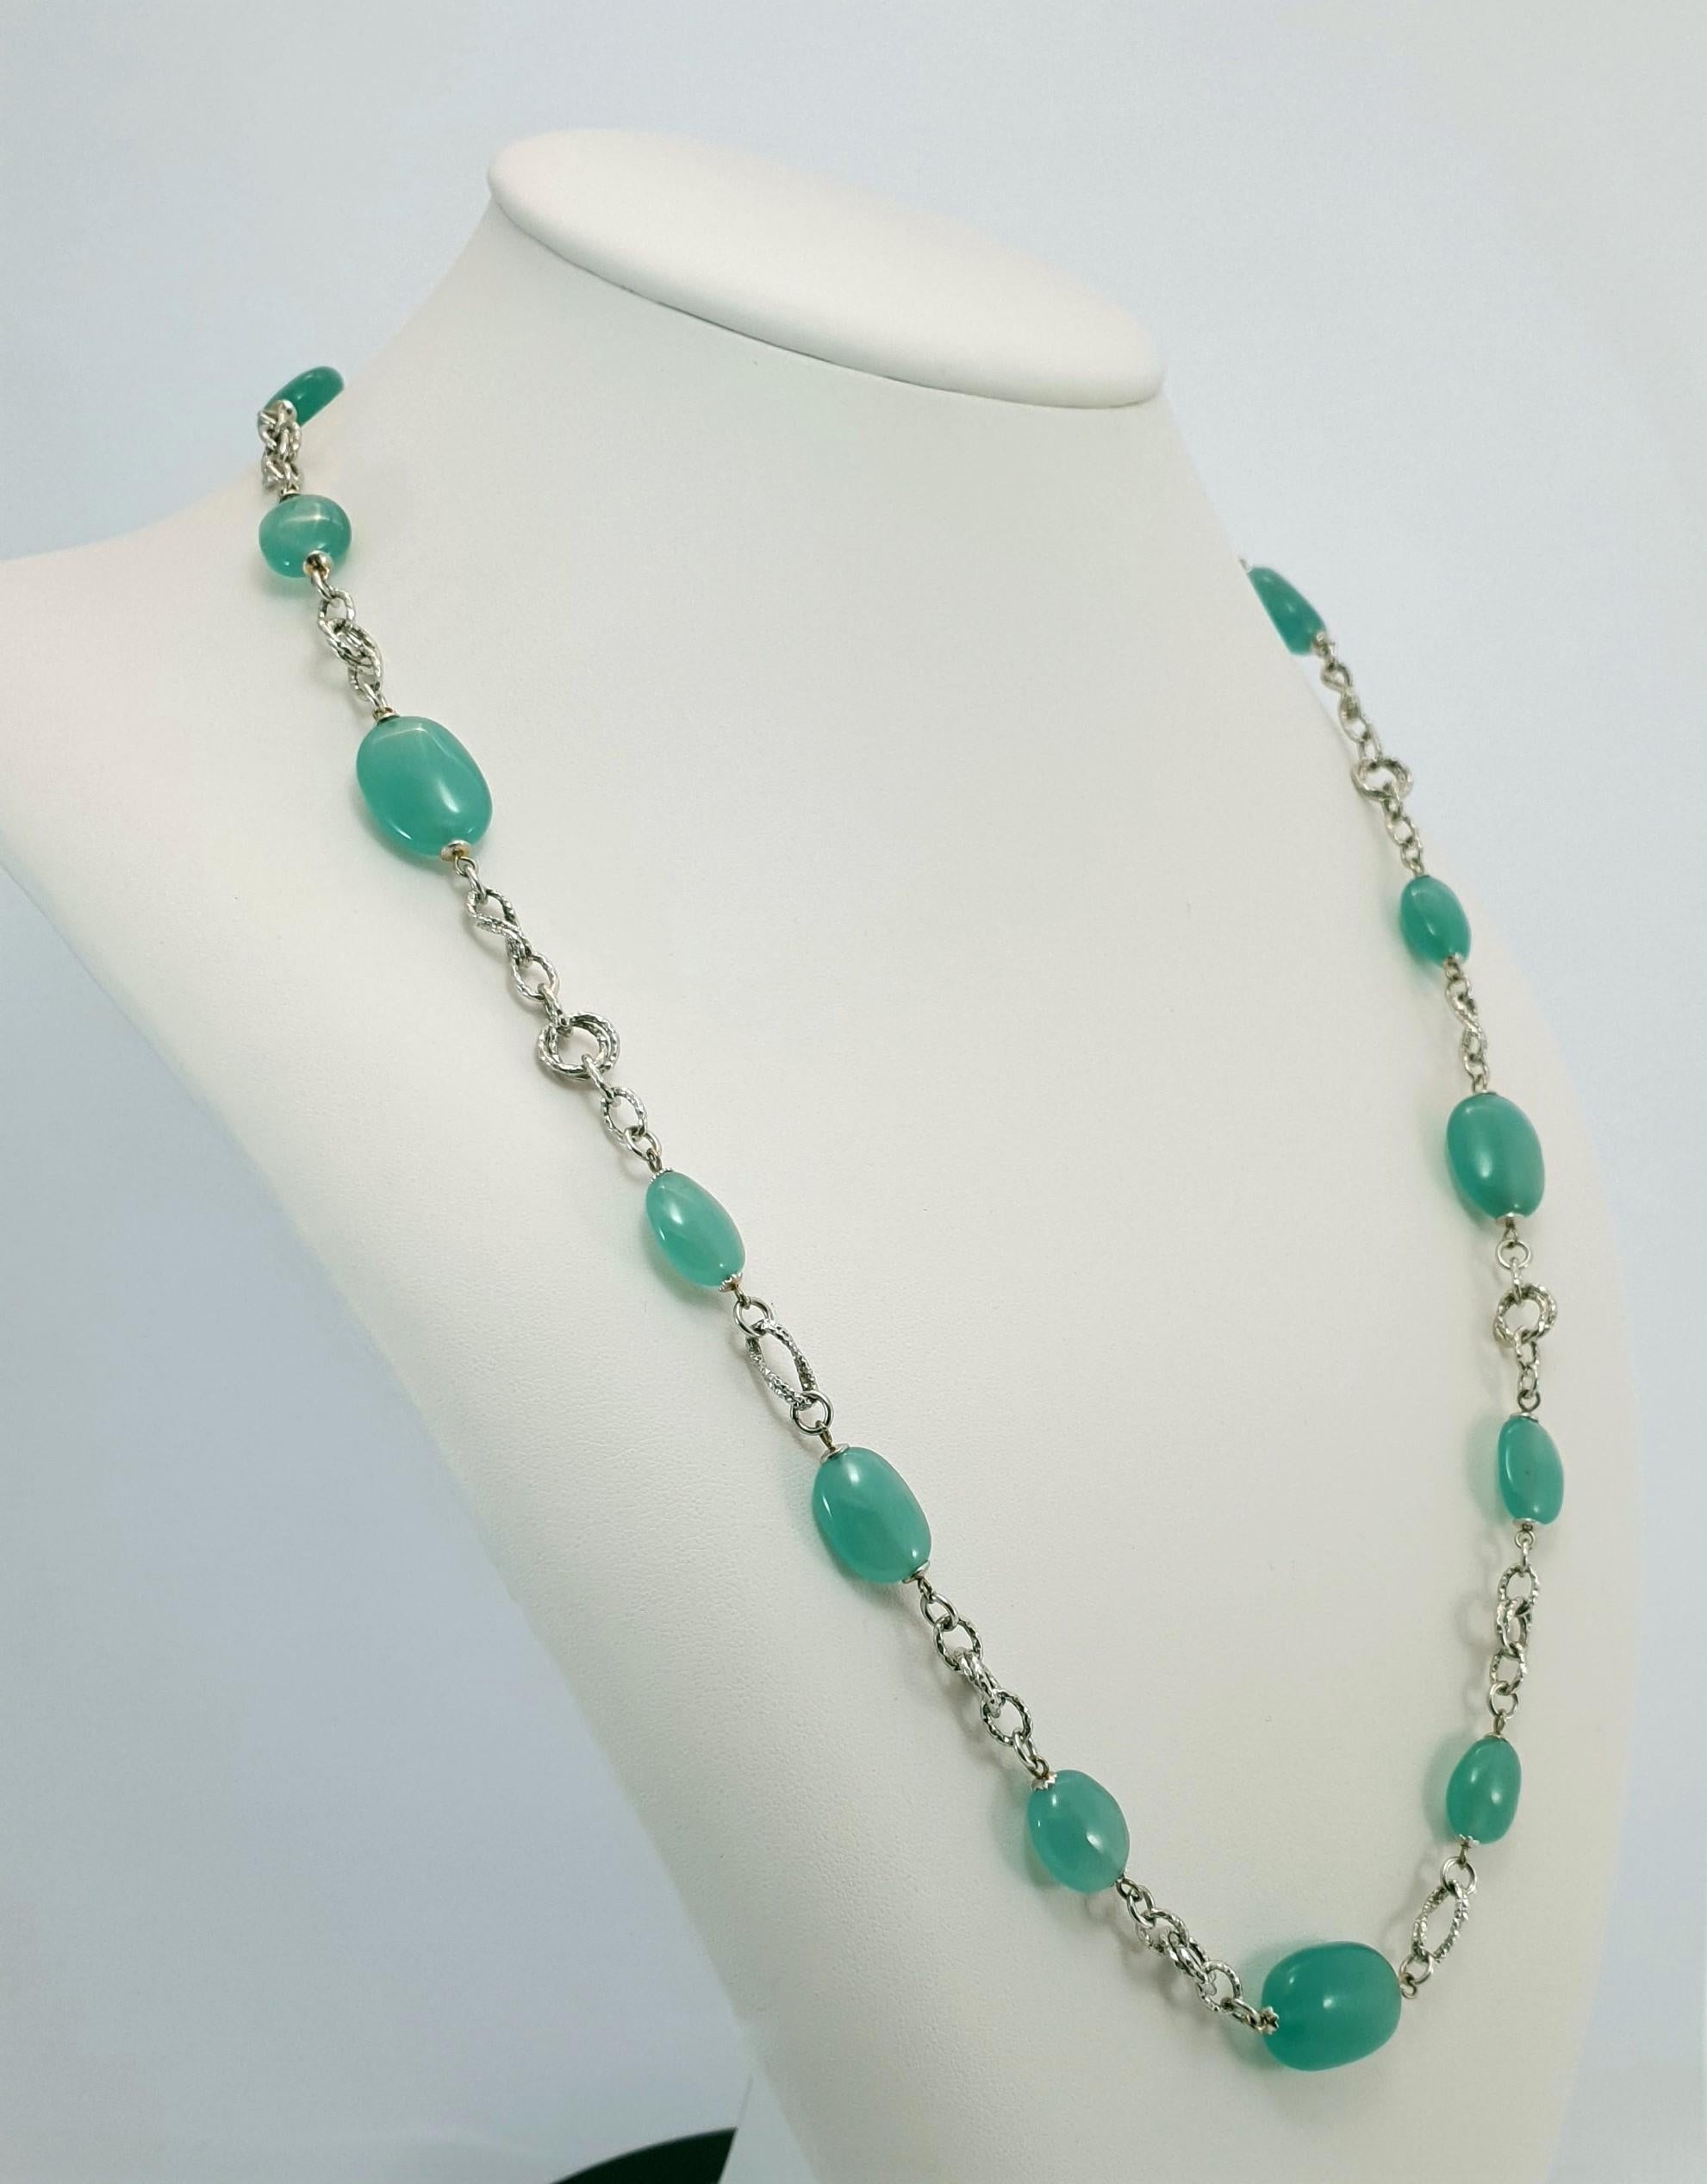 Green Chalcedony Baroque Bead Necklace with 18 Carat White Gold For Sale 3